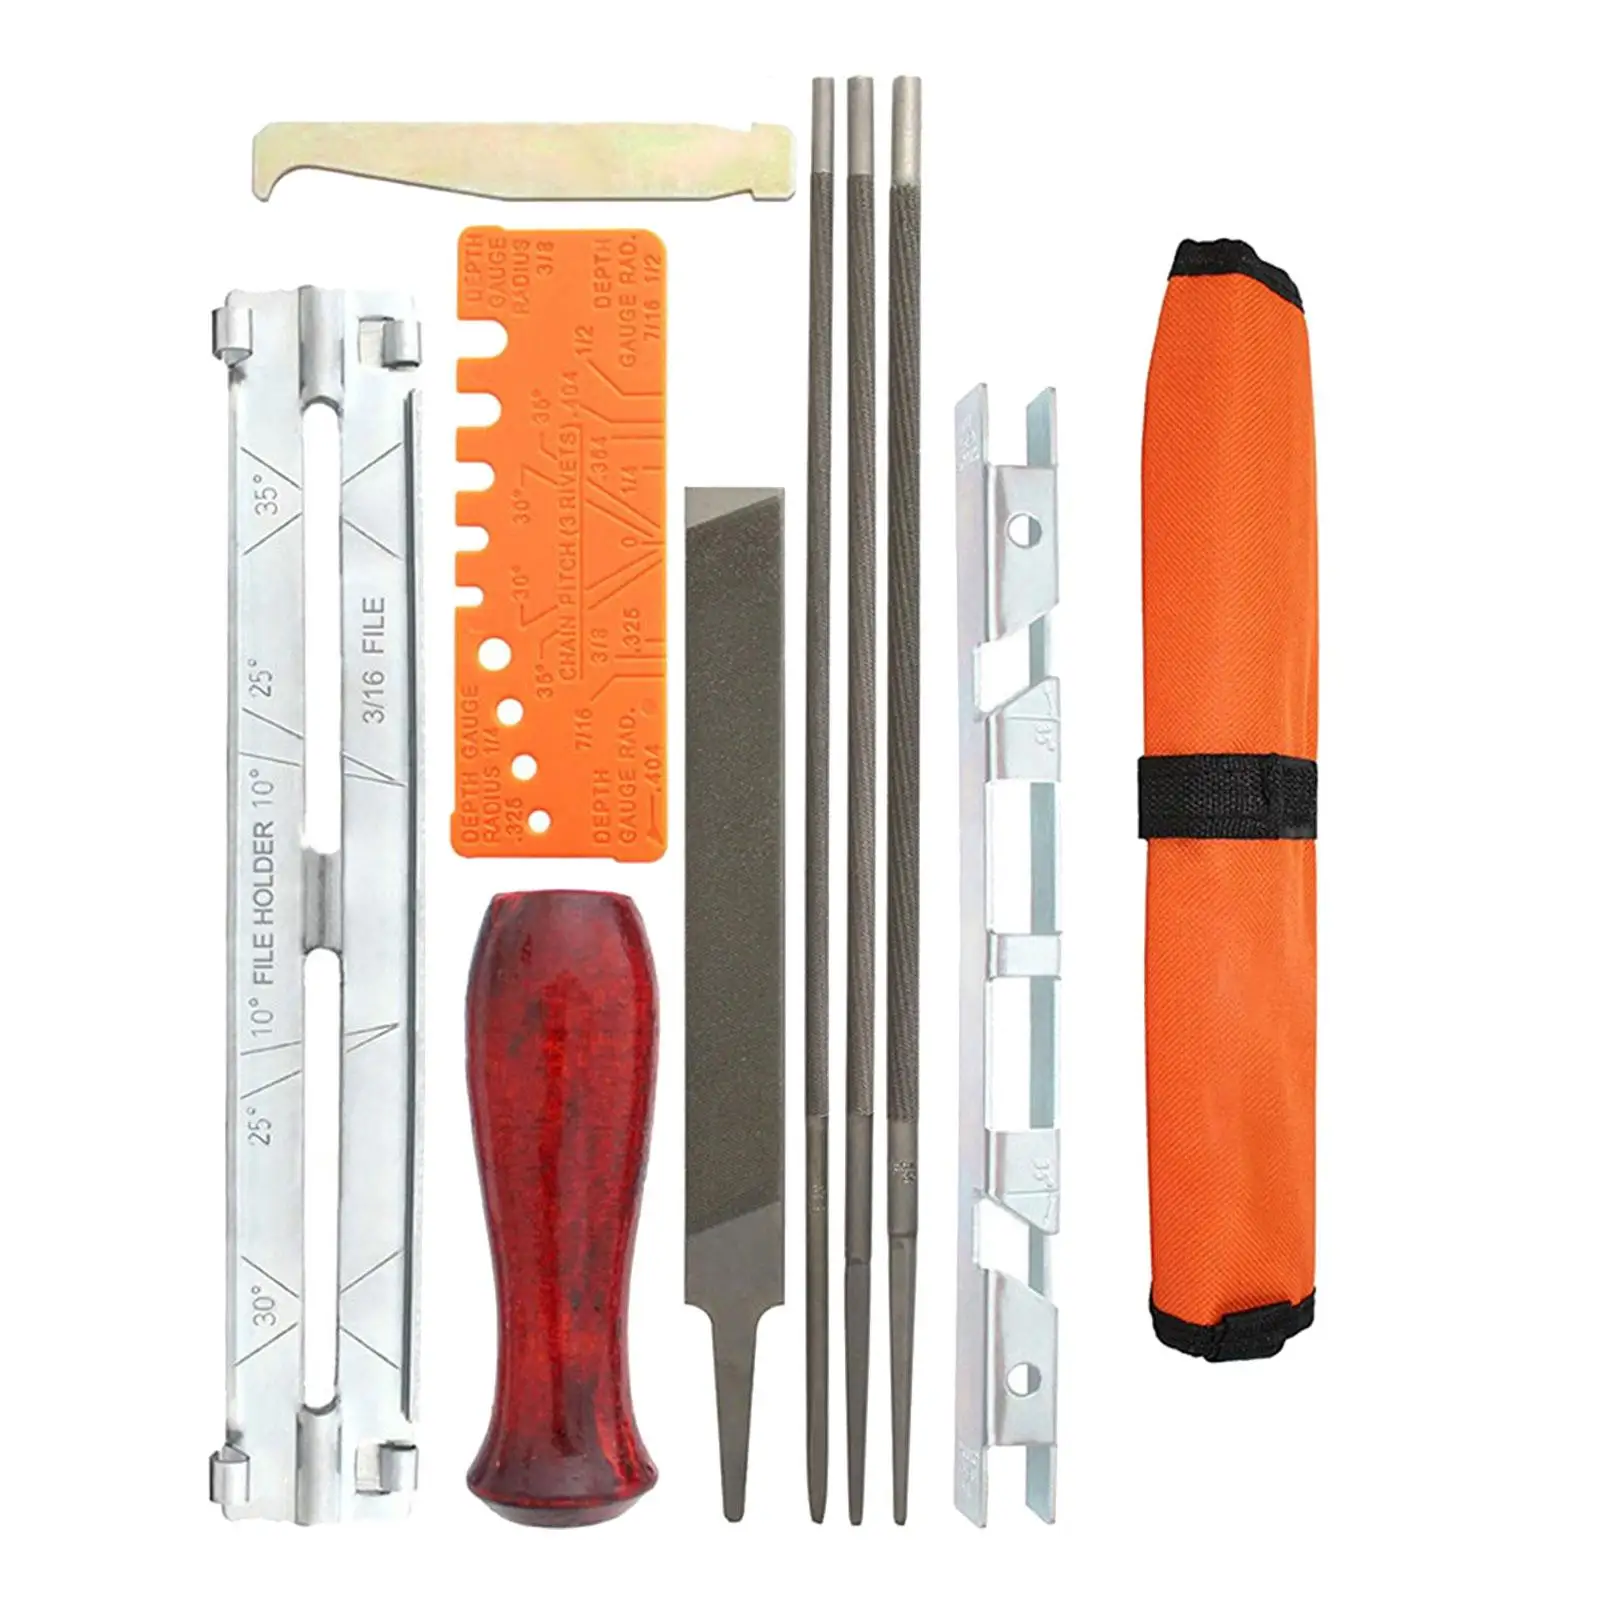 

10 Pieces Chainsaw Sharpener File Set with Tool Pouch Hardwood Guide Bar File Contains 5/32" 3/16" 7/32" Round Chainsaw File Set